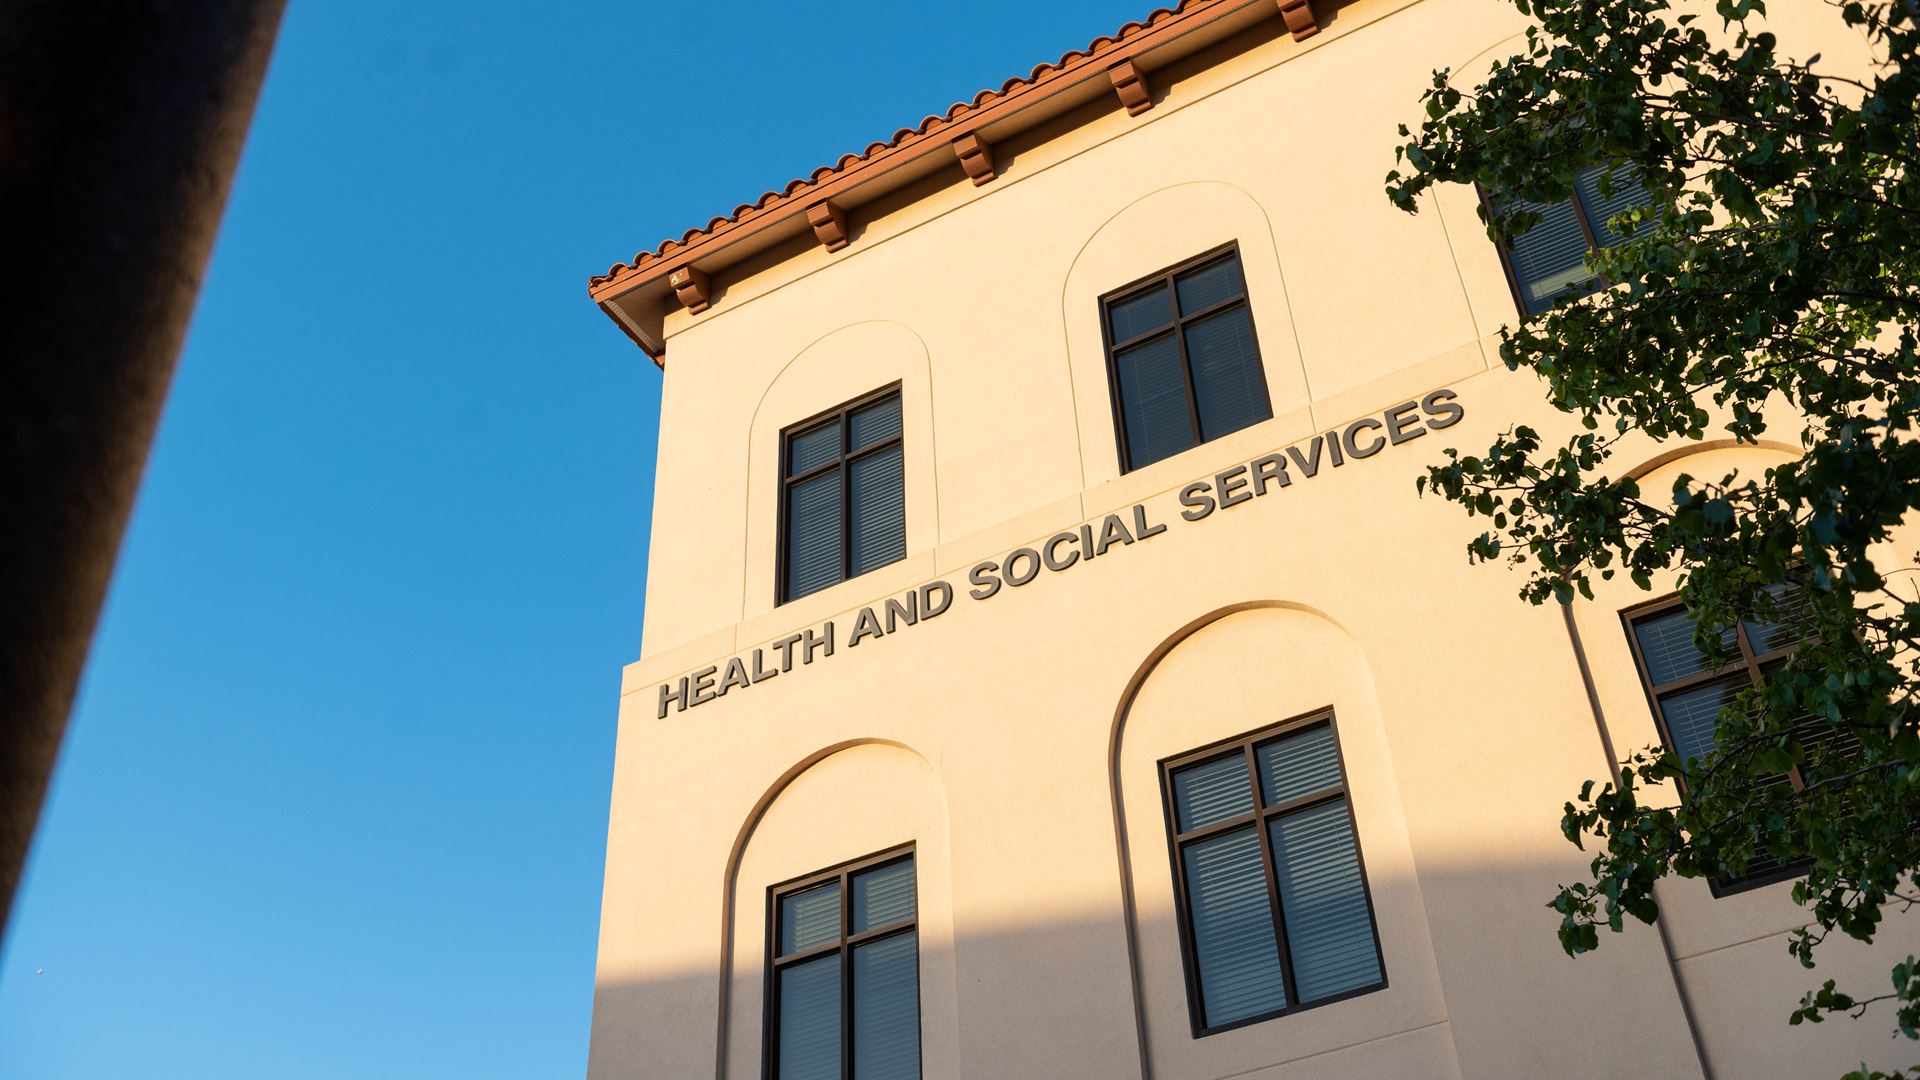 Health and Social Services Building 2022 NMSU photo by Josh Bachman